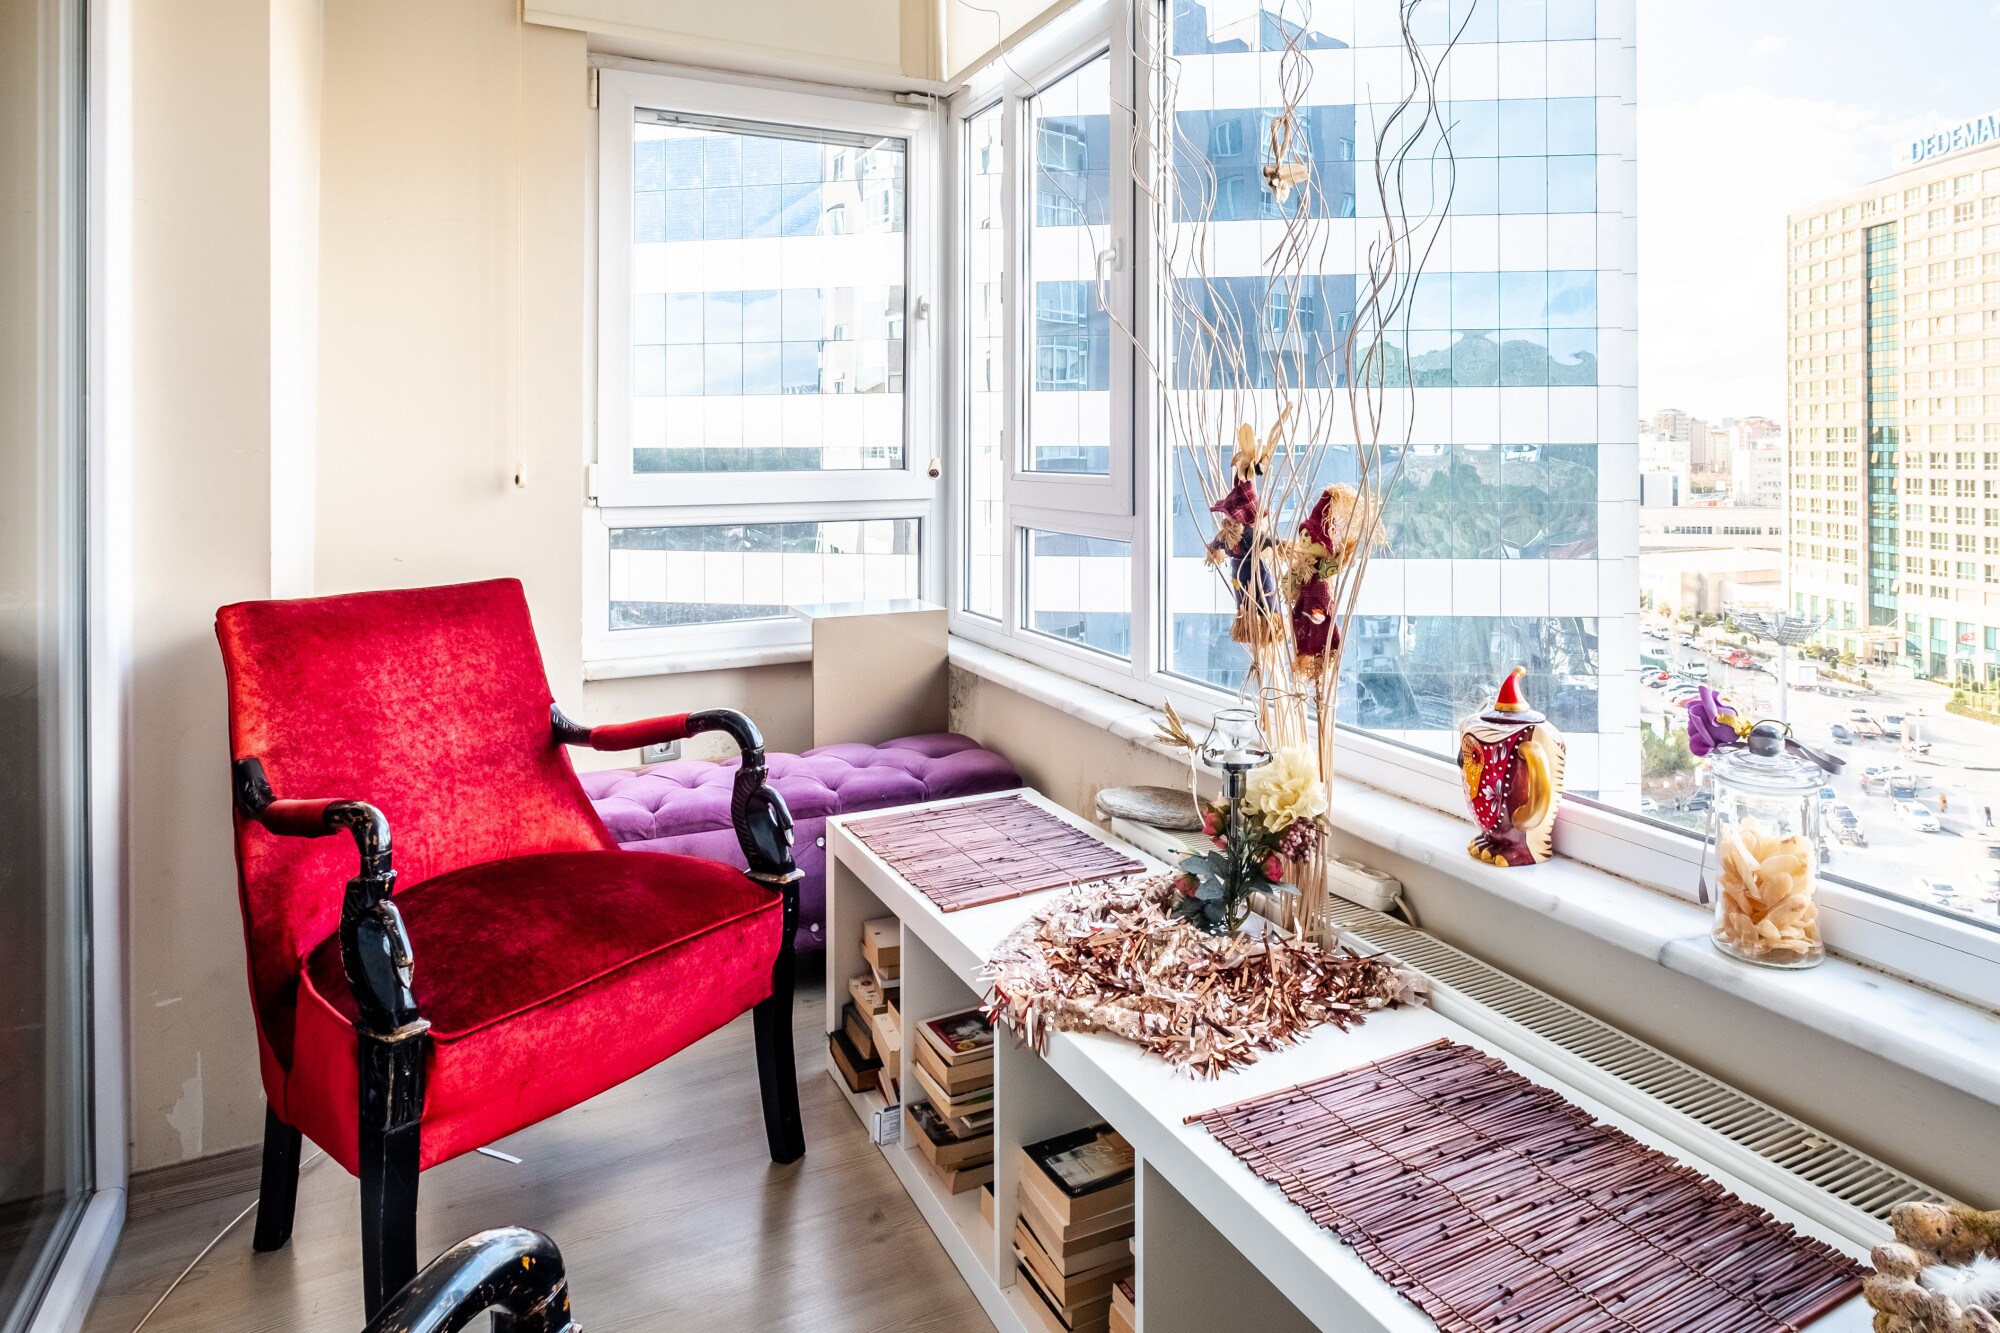 Our charming flat is ready to host you during your Istanbul stay.